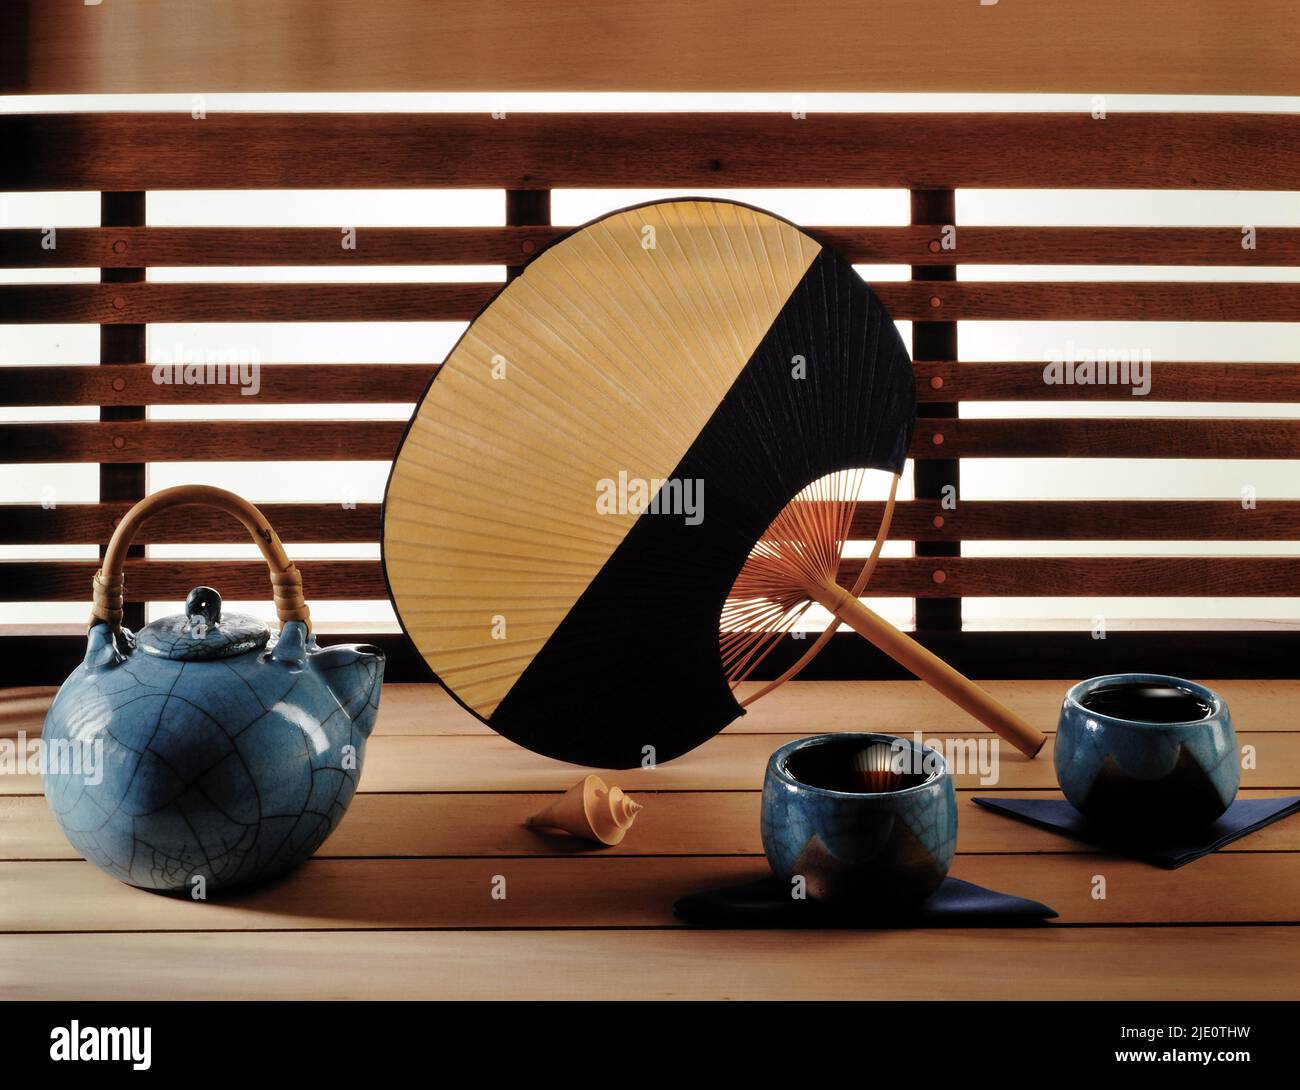 Cups of tea and Japanese fan. Stock Photo